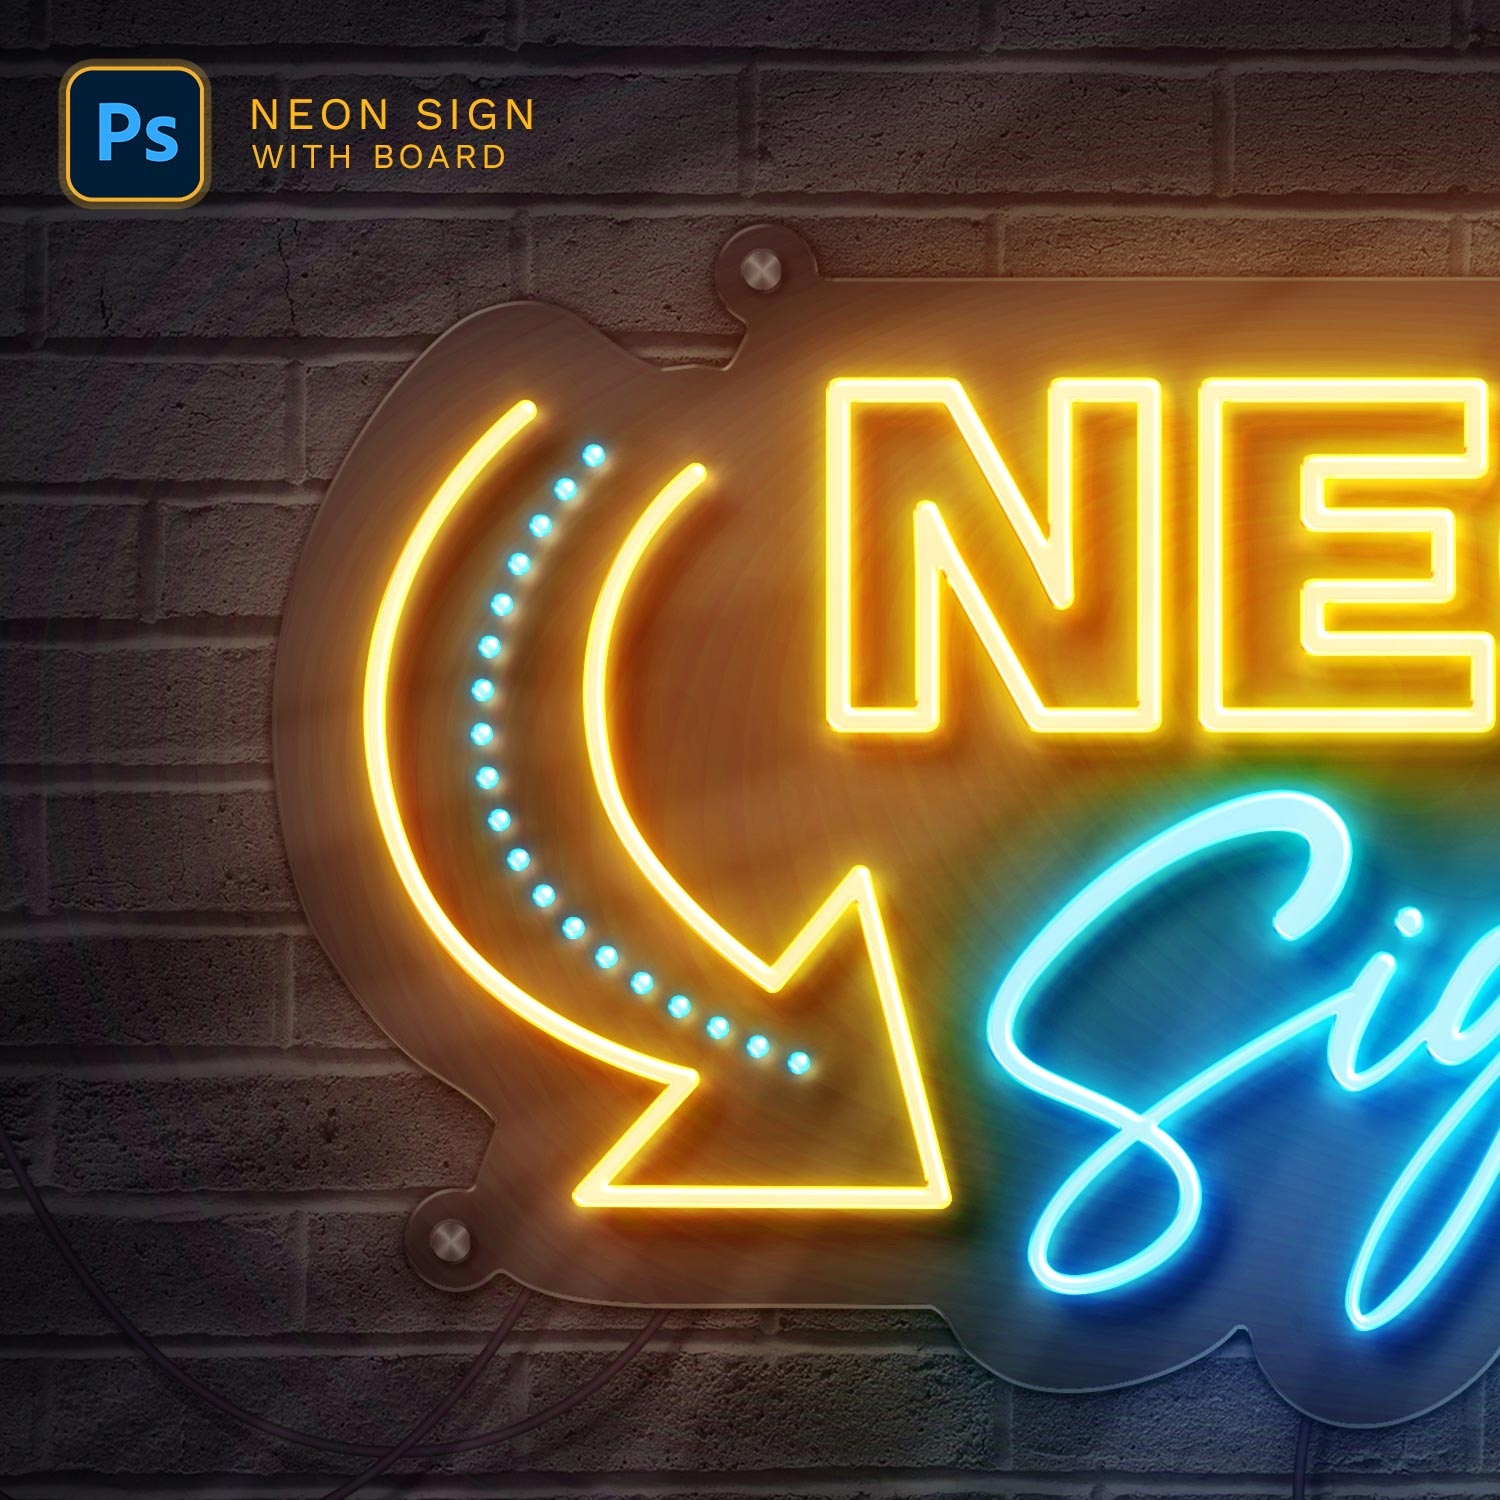 Neon Sign Board preview image.